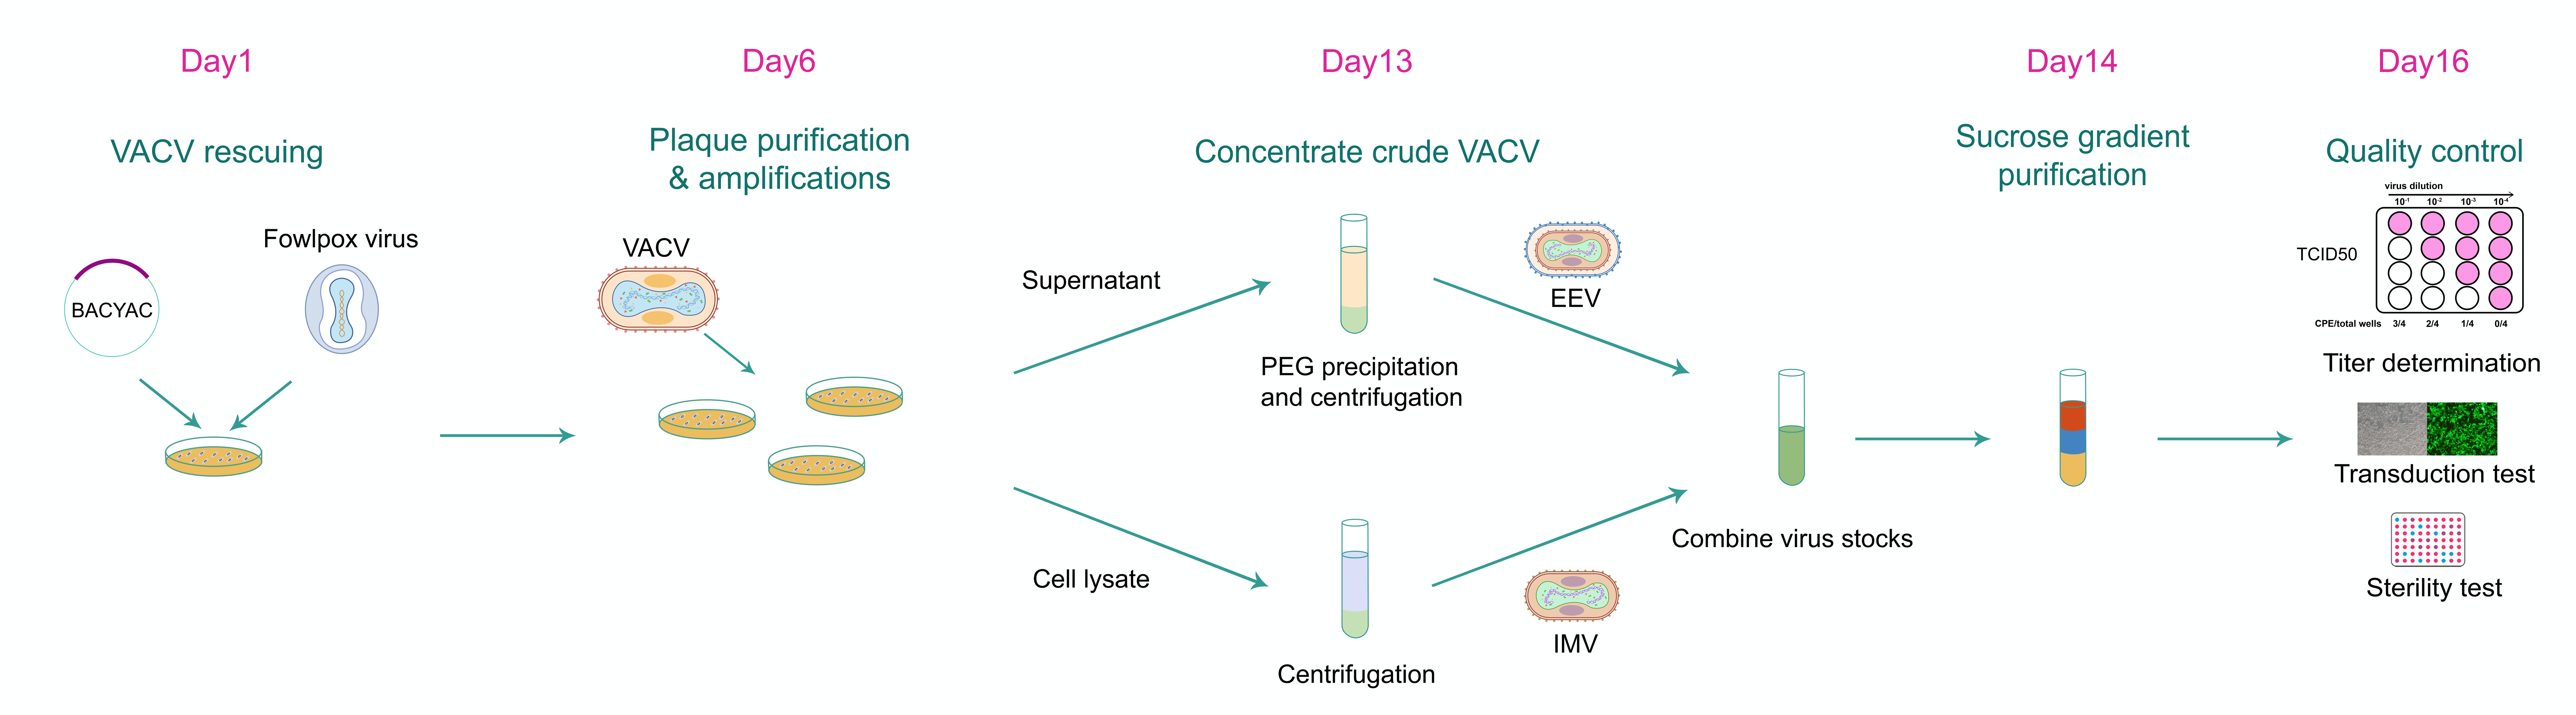 Typical workflow of VACV packaging from the generation of crude VACV to quality control.